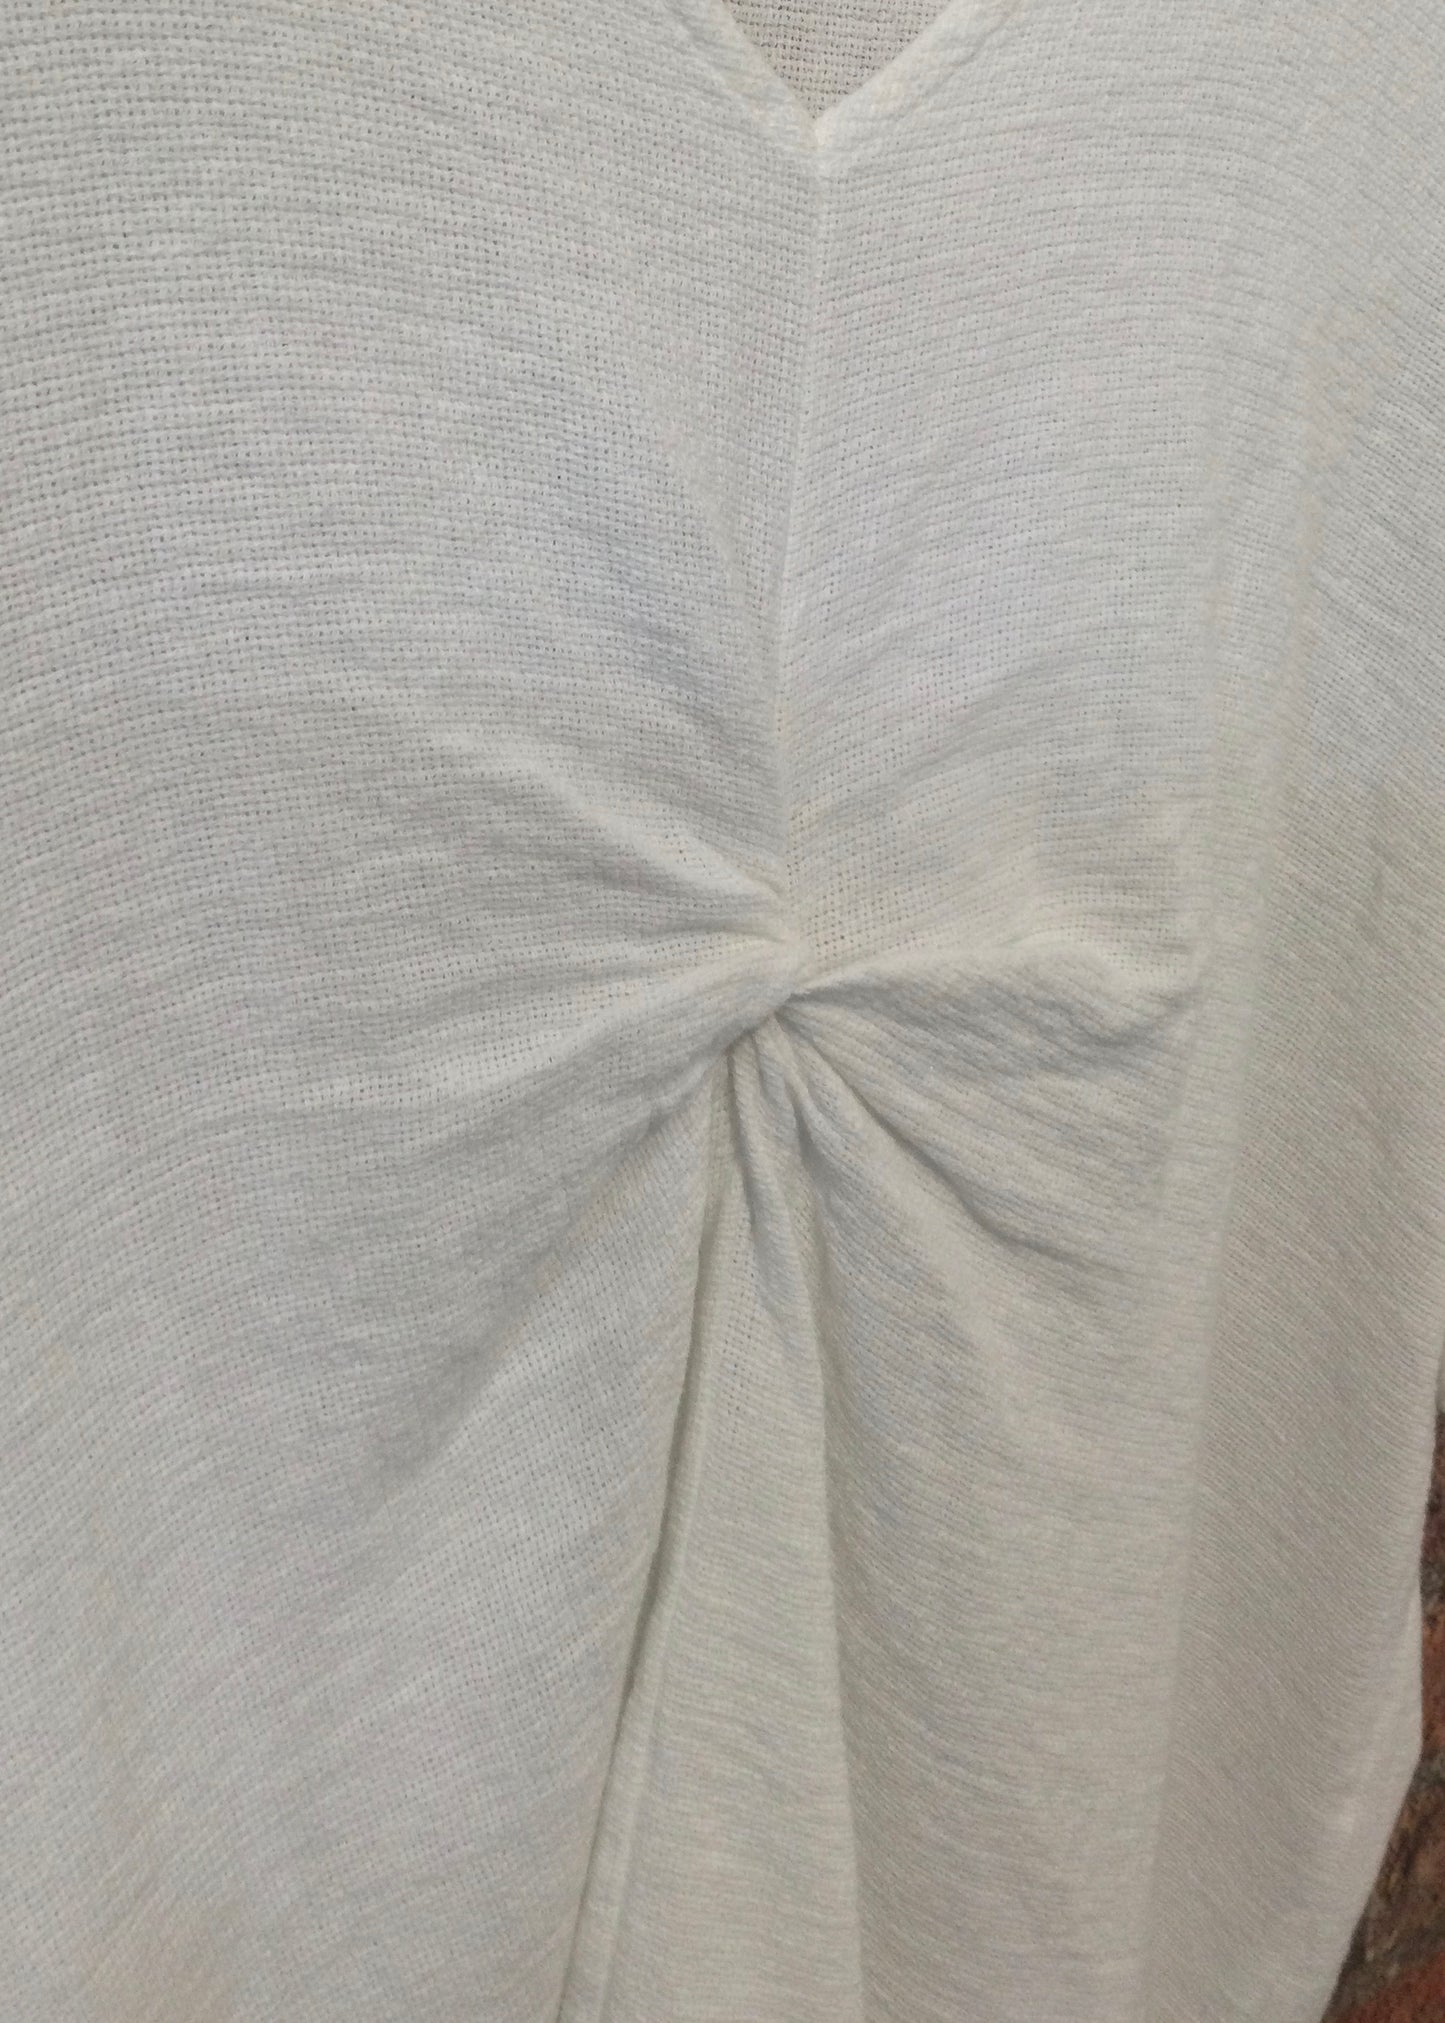 Sands - Washed Linen Ruched Top / White